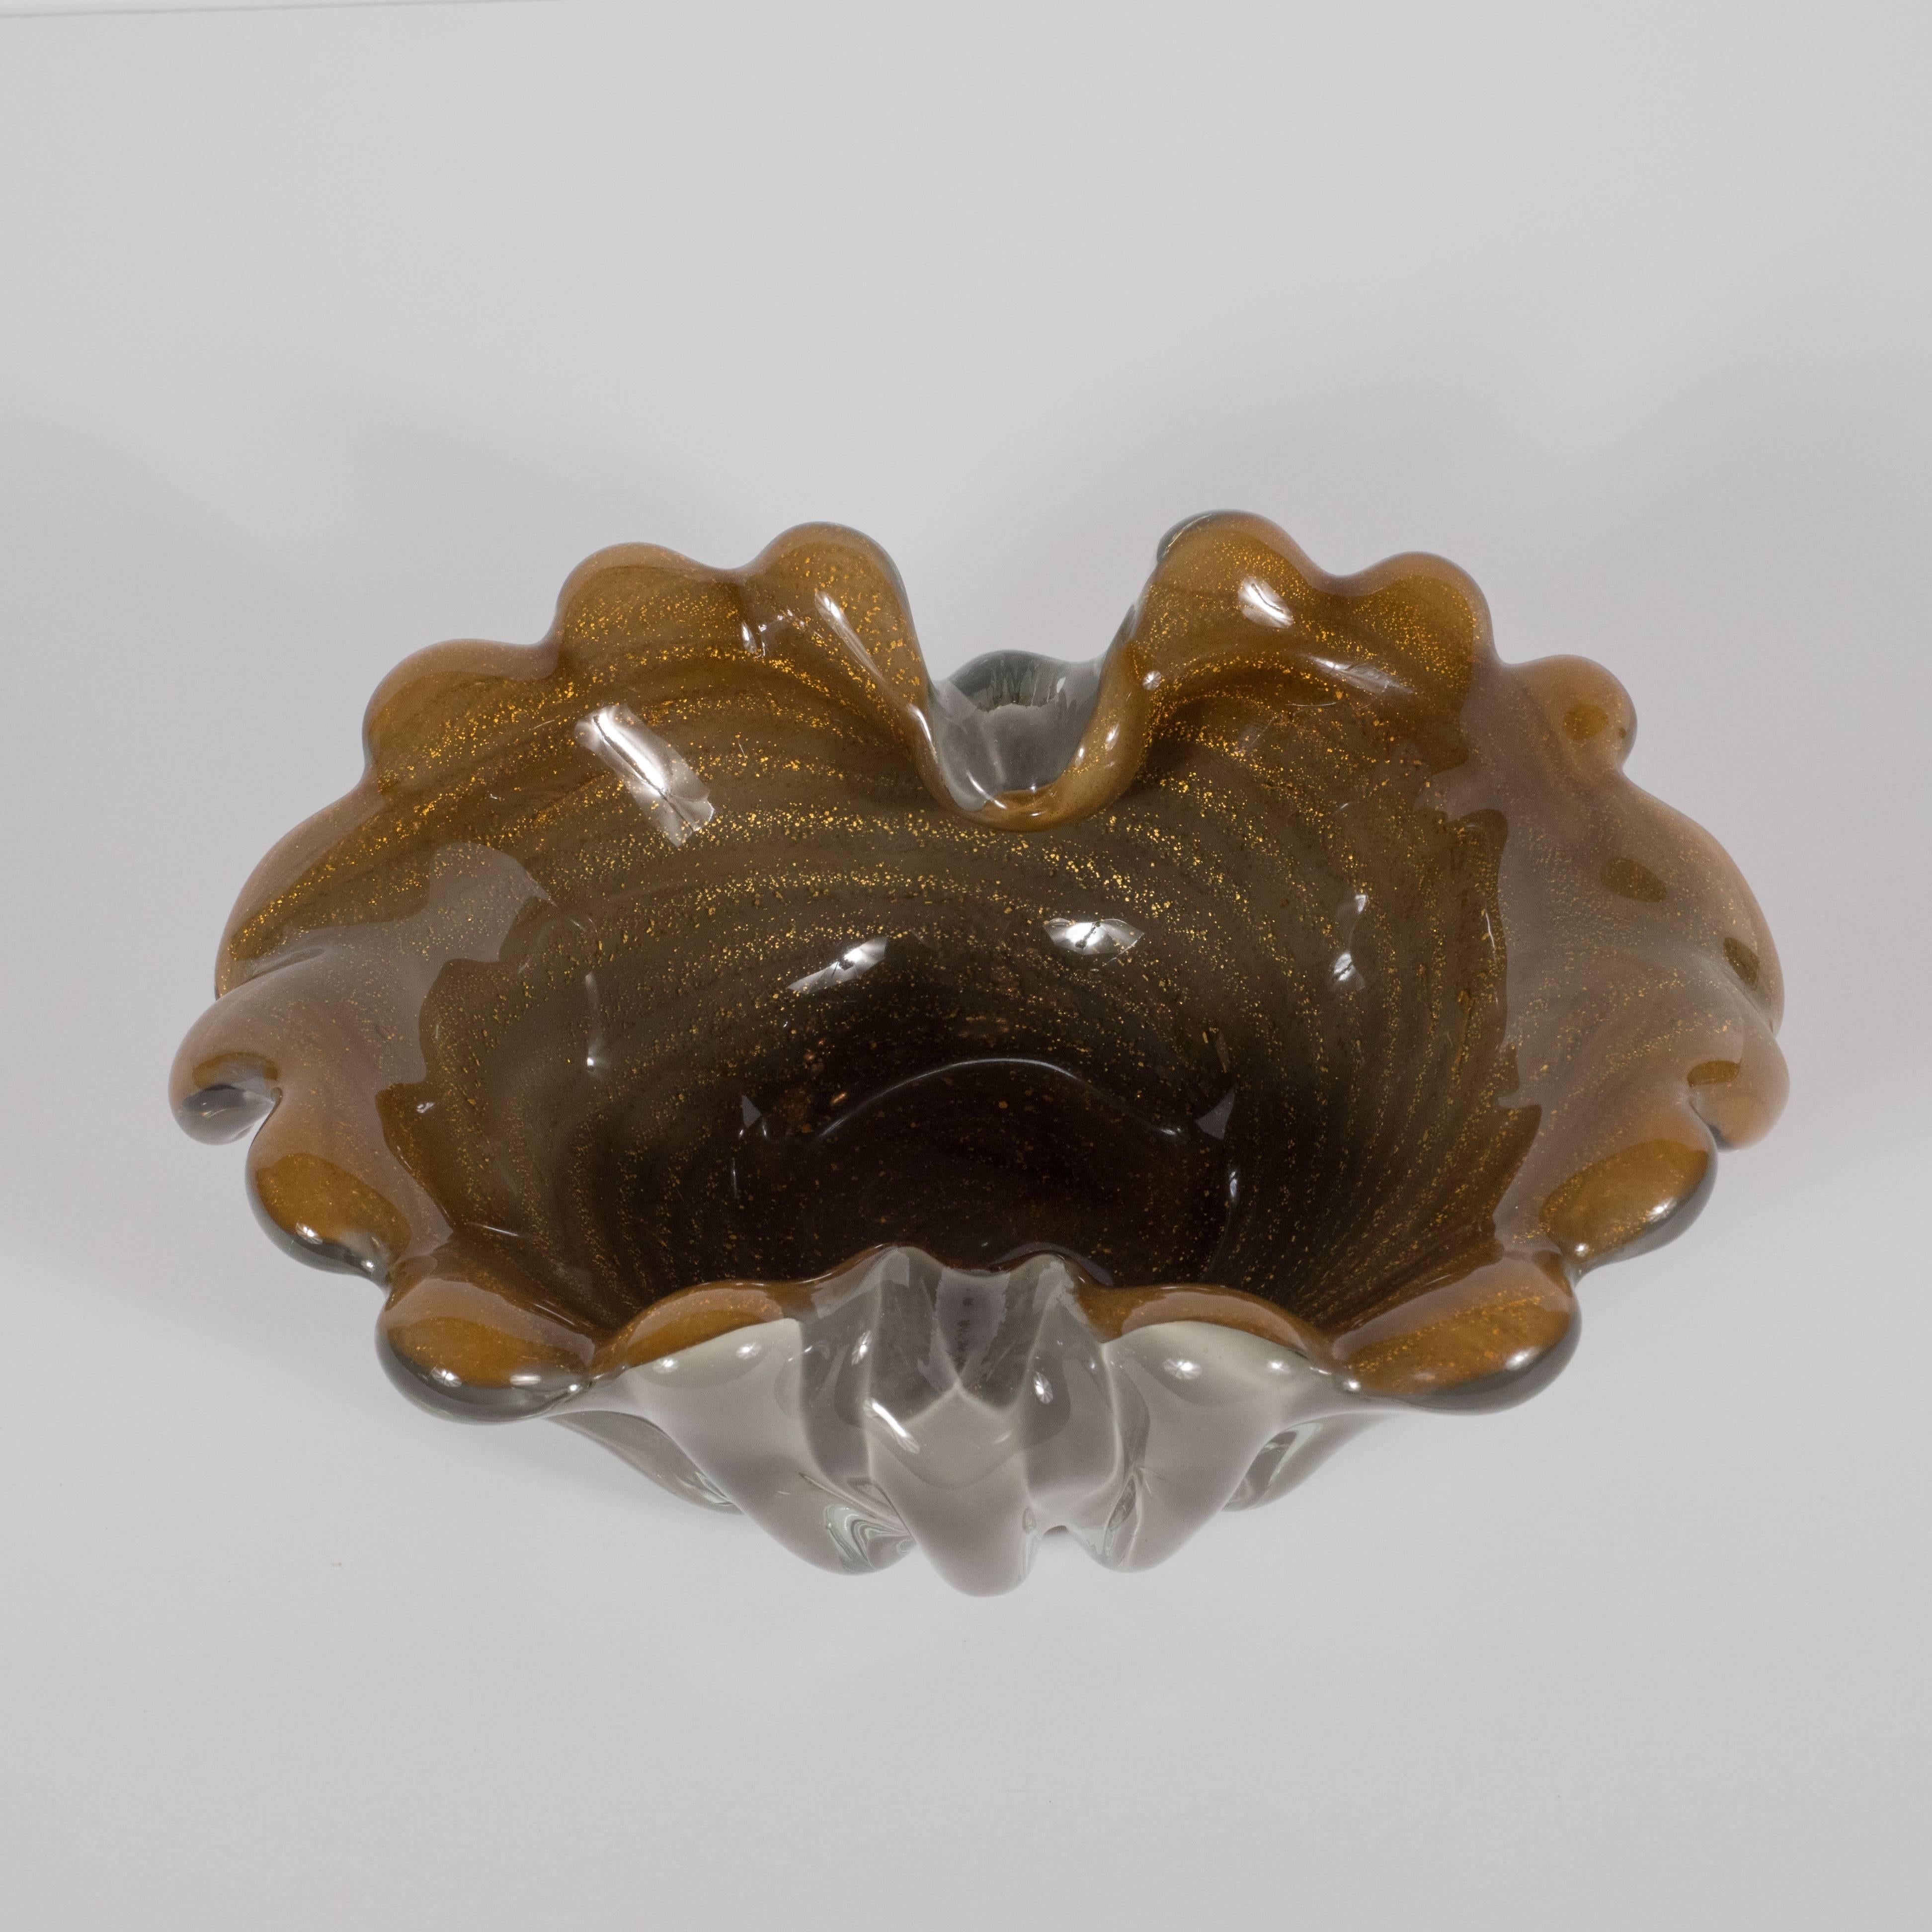 This classically Mid-Century Modern bowl was handblown on the fabled Venetian island of Murano renowned for its high quality glass production for centuries, circa 1950. This piece features a smoked pewter exterior enrobed in thick reeded tubes that